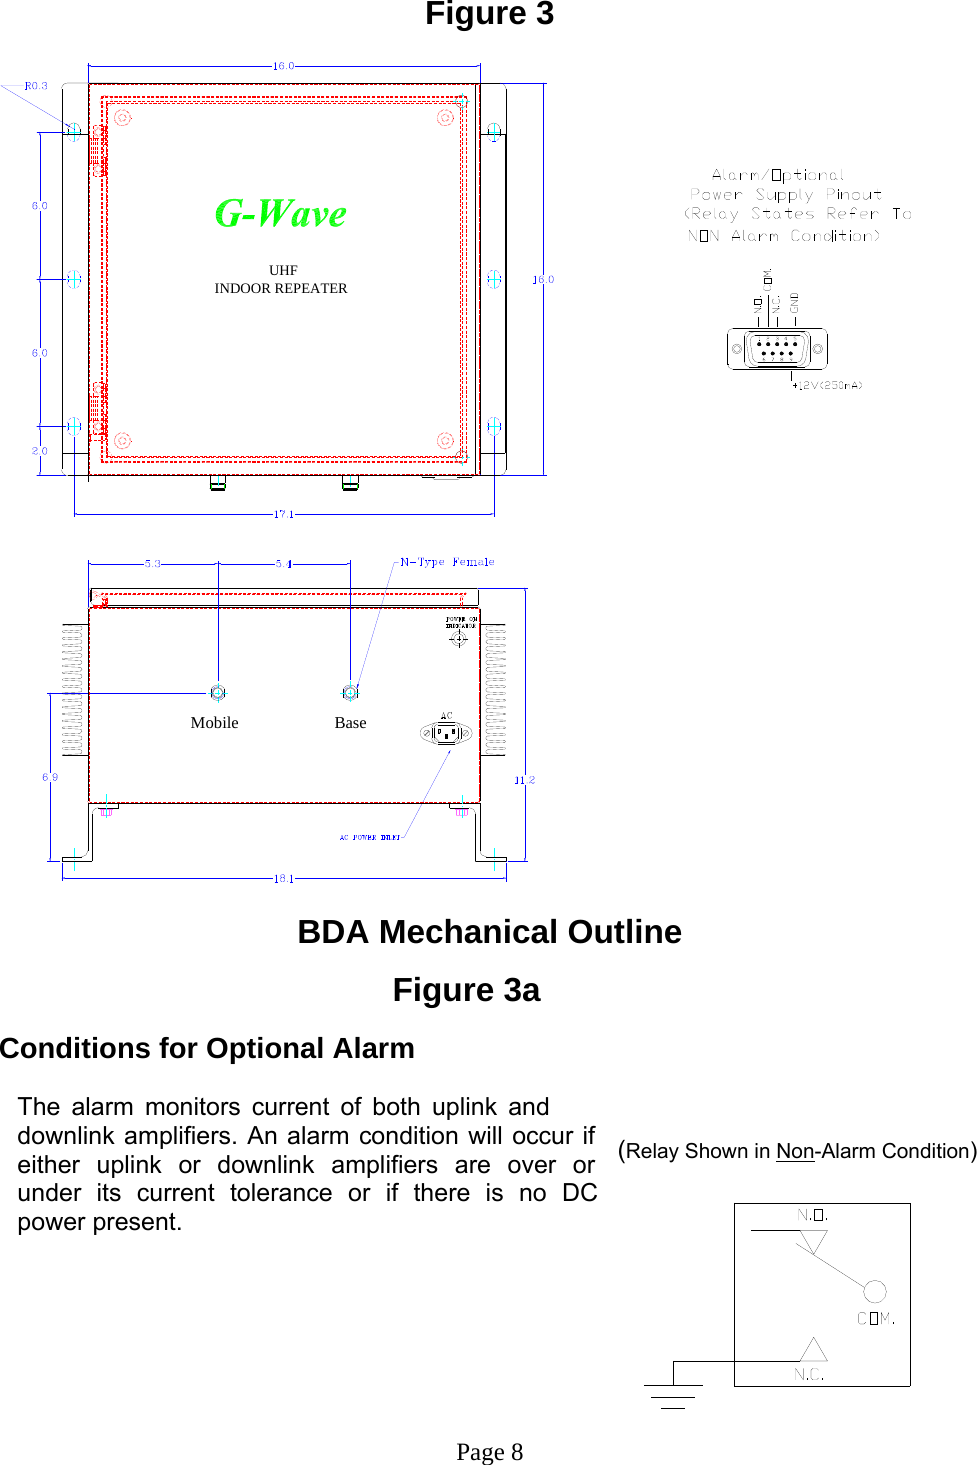 Figure 3 UHFINDOOR REPEATER  Mobile                       Base BDA Mechanical Outline       Figure 3a      The alarm monitors current of both uplink and downlink amplifiers. An alarm condition will occur if either uplink or downlink amplifiers are over or under its current tolerance or if there is no DC power present.                                                           (Relay Shown in Non-Alarm Condition)Conditions for Optional Alarm                                                                                                                                          Page 8 